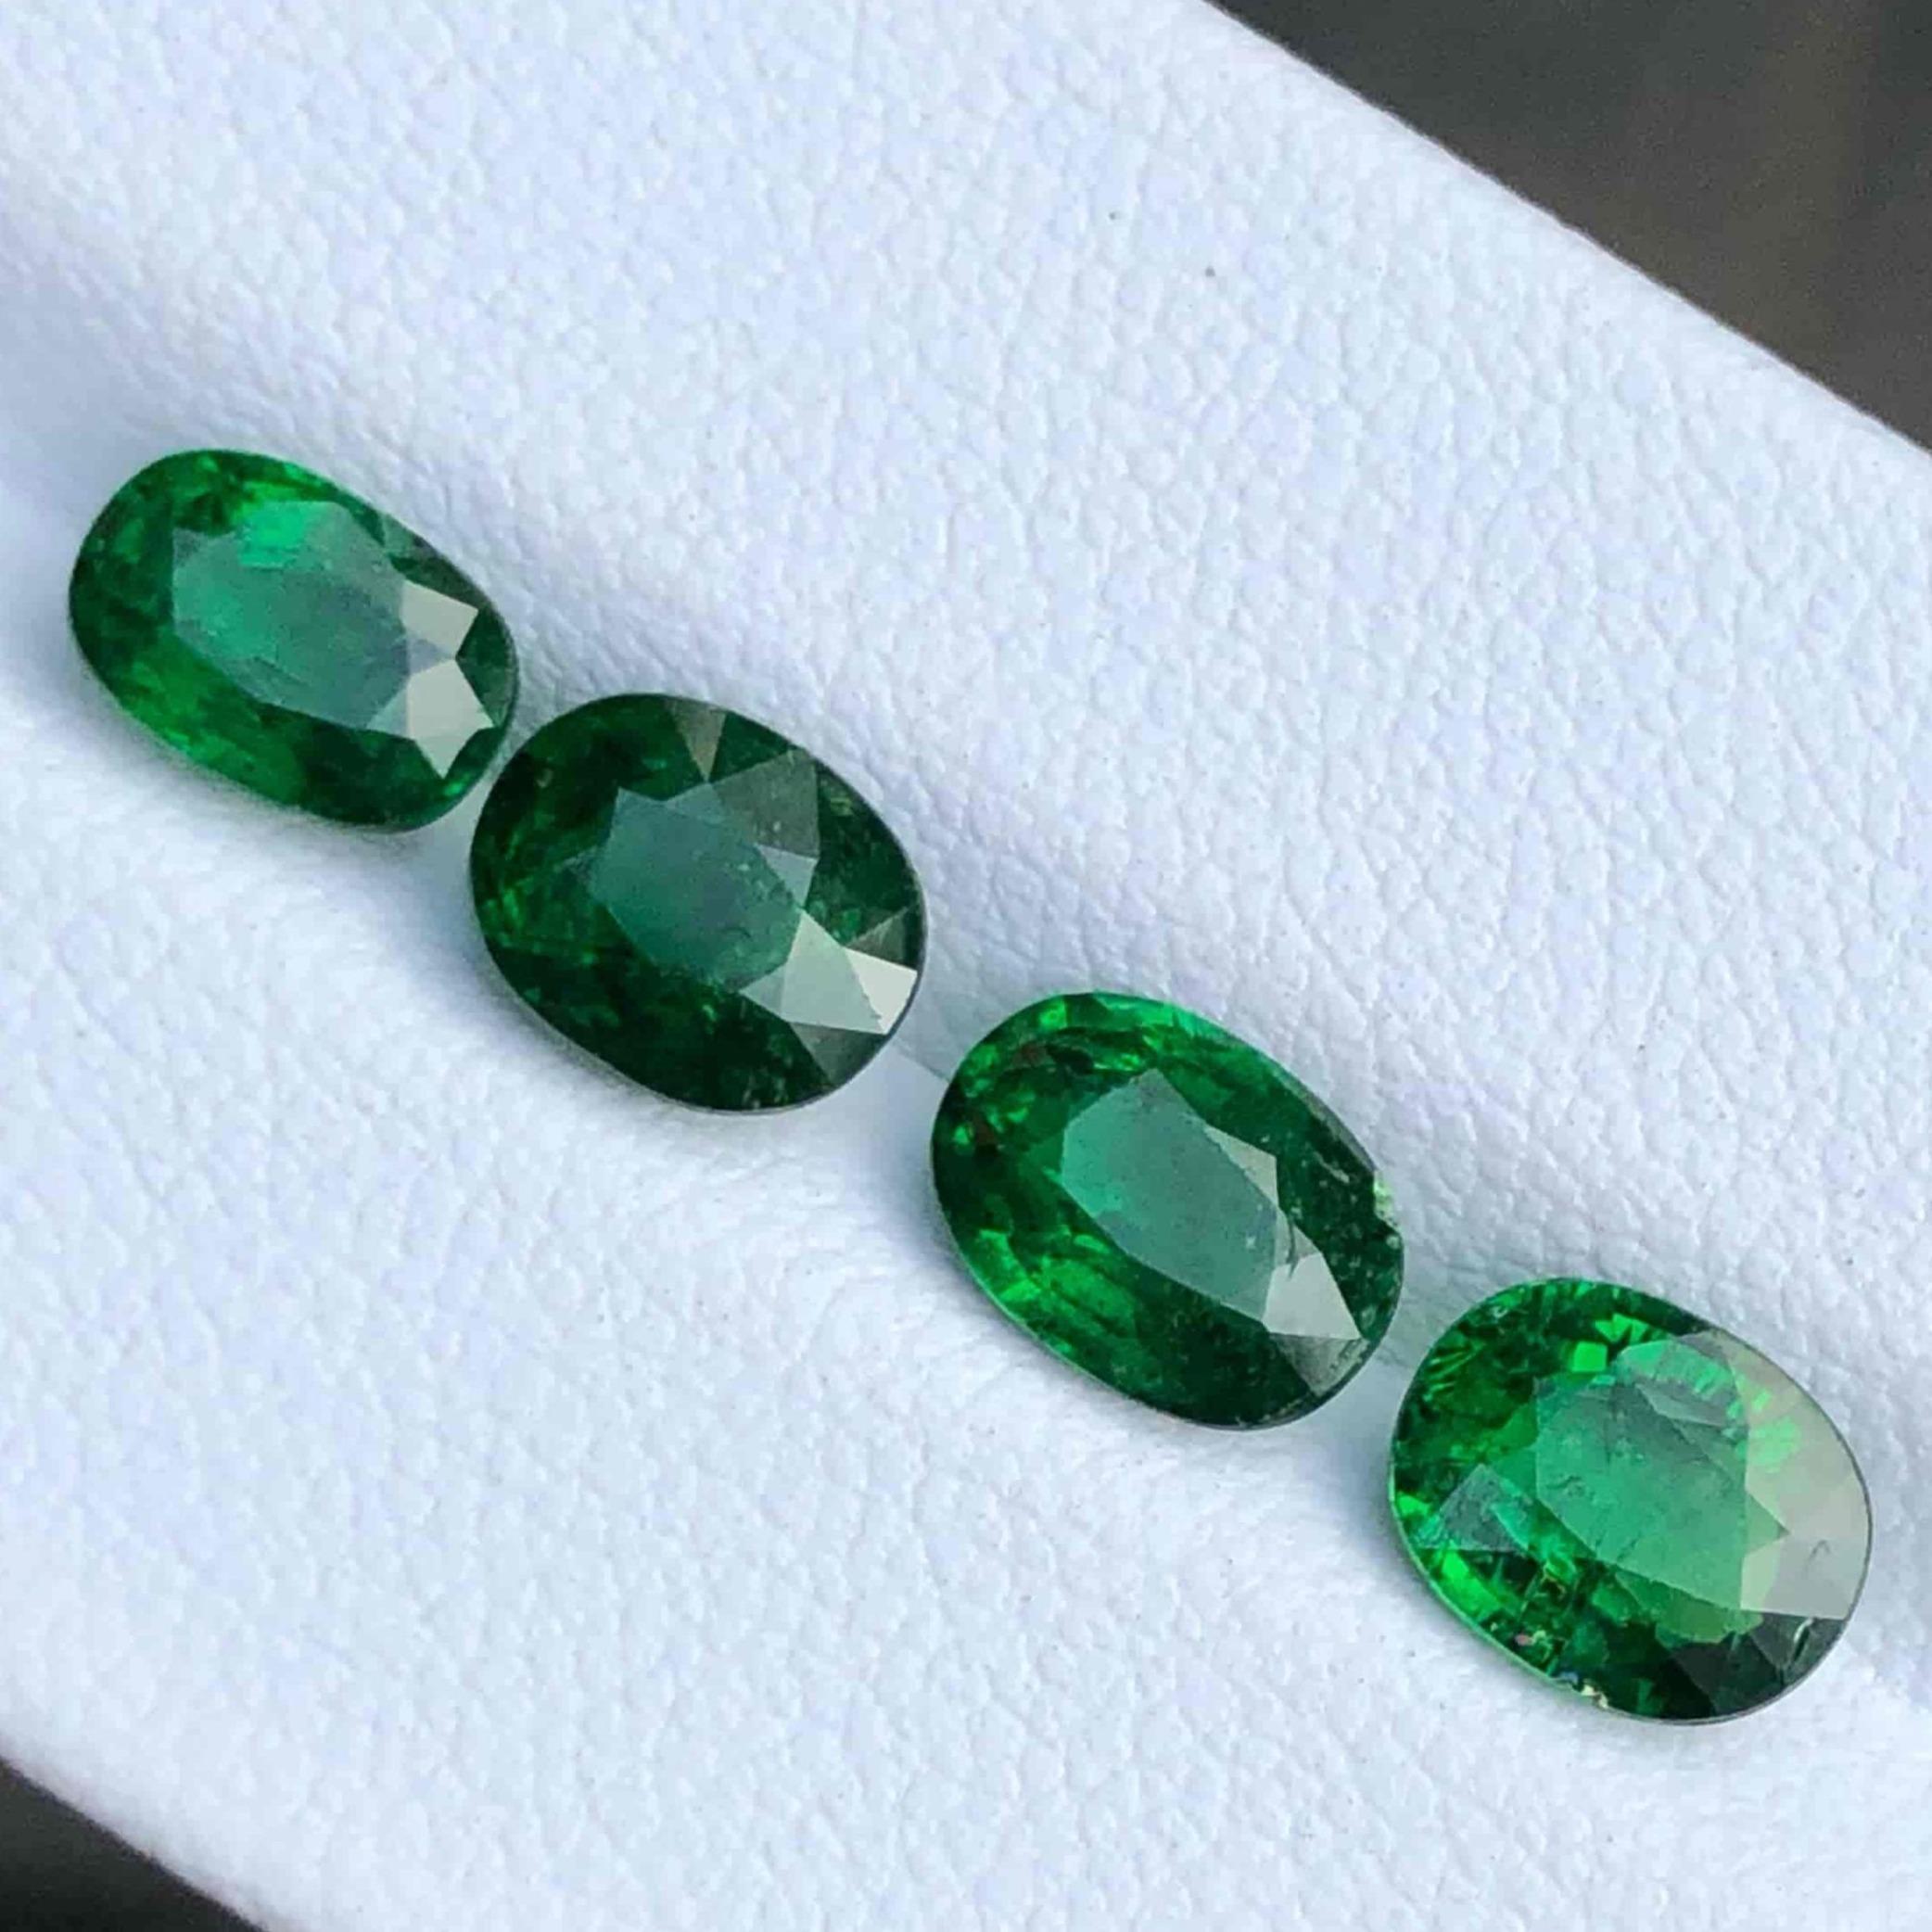 Gemstone Type Natural Tsavorite Garnet Set
Weight 5.60 carats
Weights 1.25, 1.25, 1.35 and 1.55 carats
Clarity Slightly Included (SI)
Origin Kenya
Treatment None





Introducing the breathtaking allure of our 5.60 Carats Natural Tsavorite Green